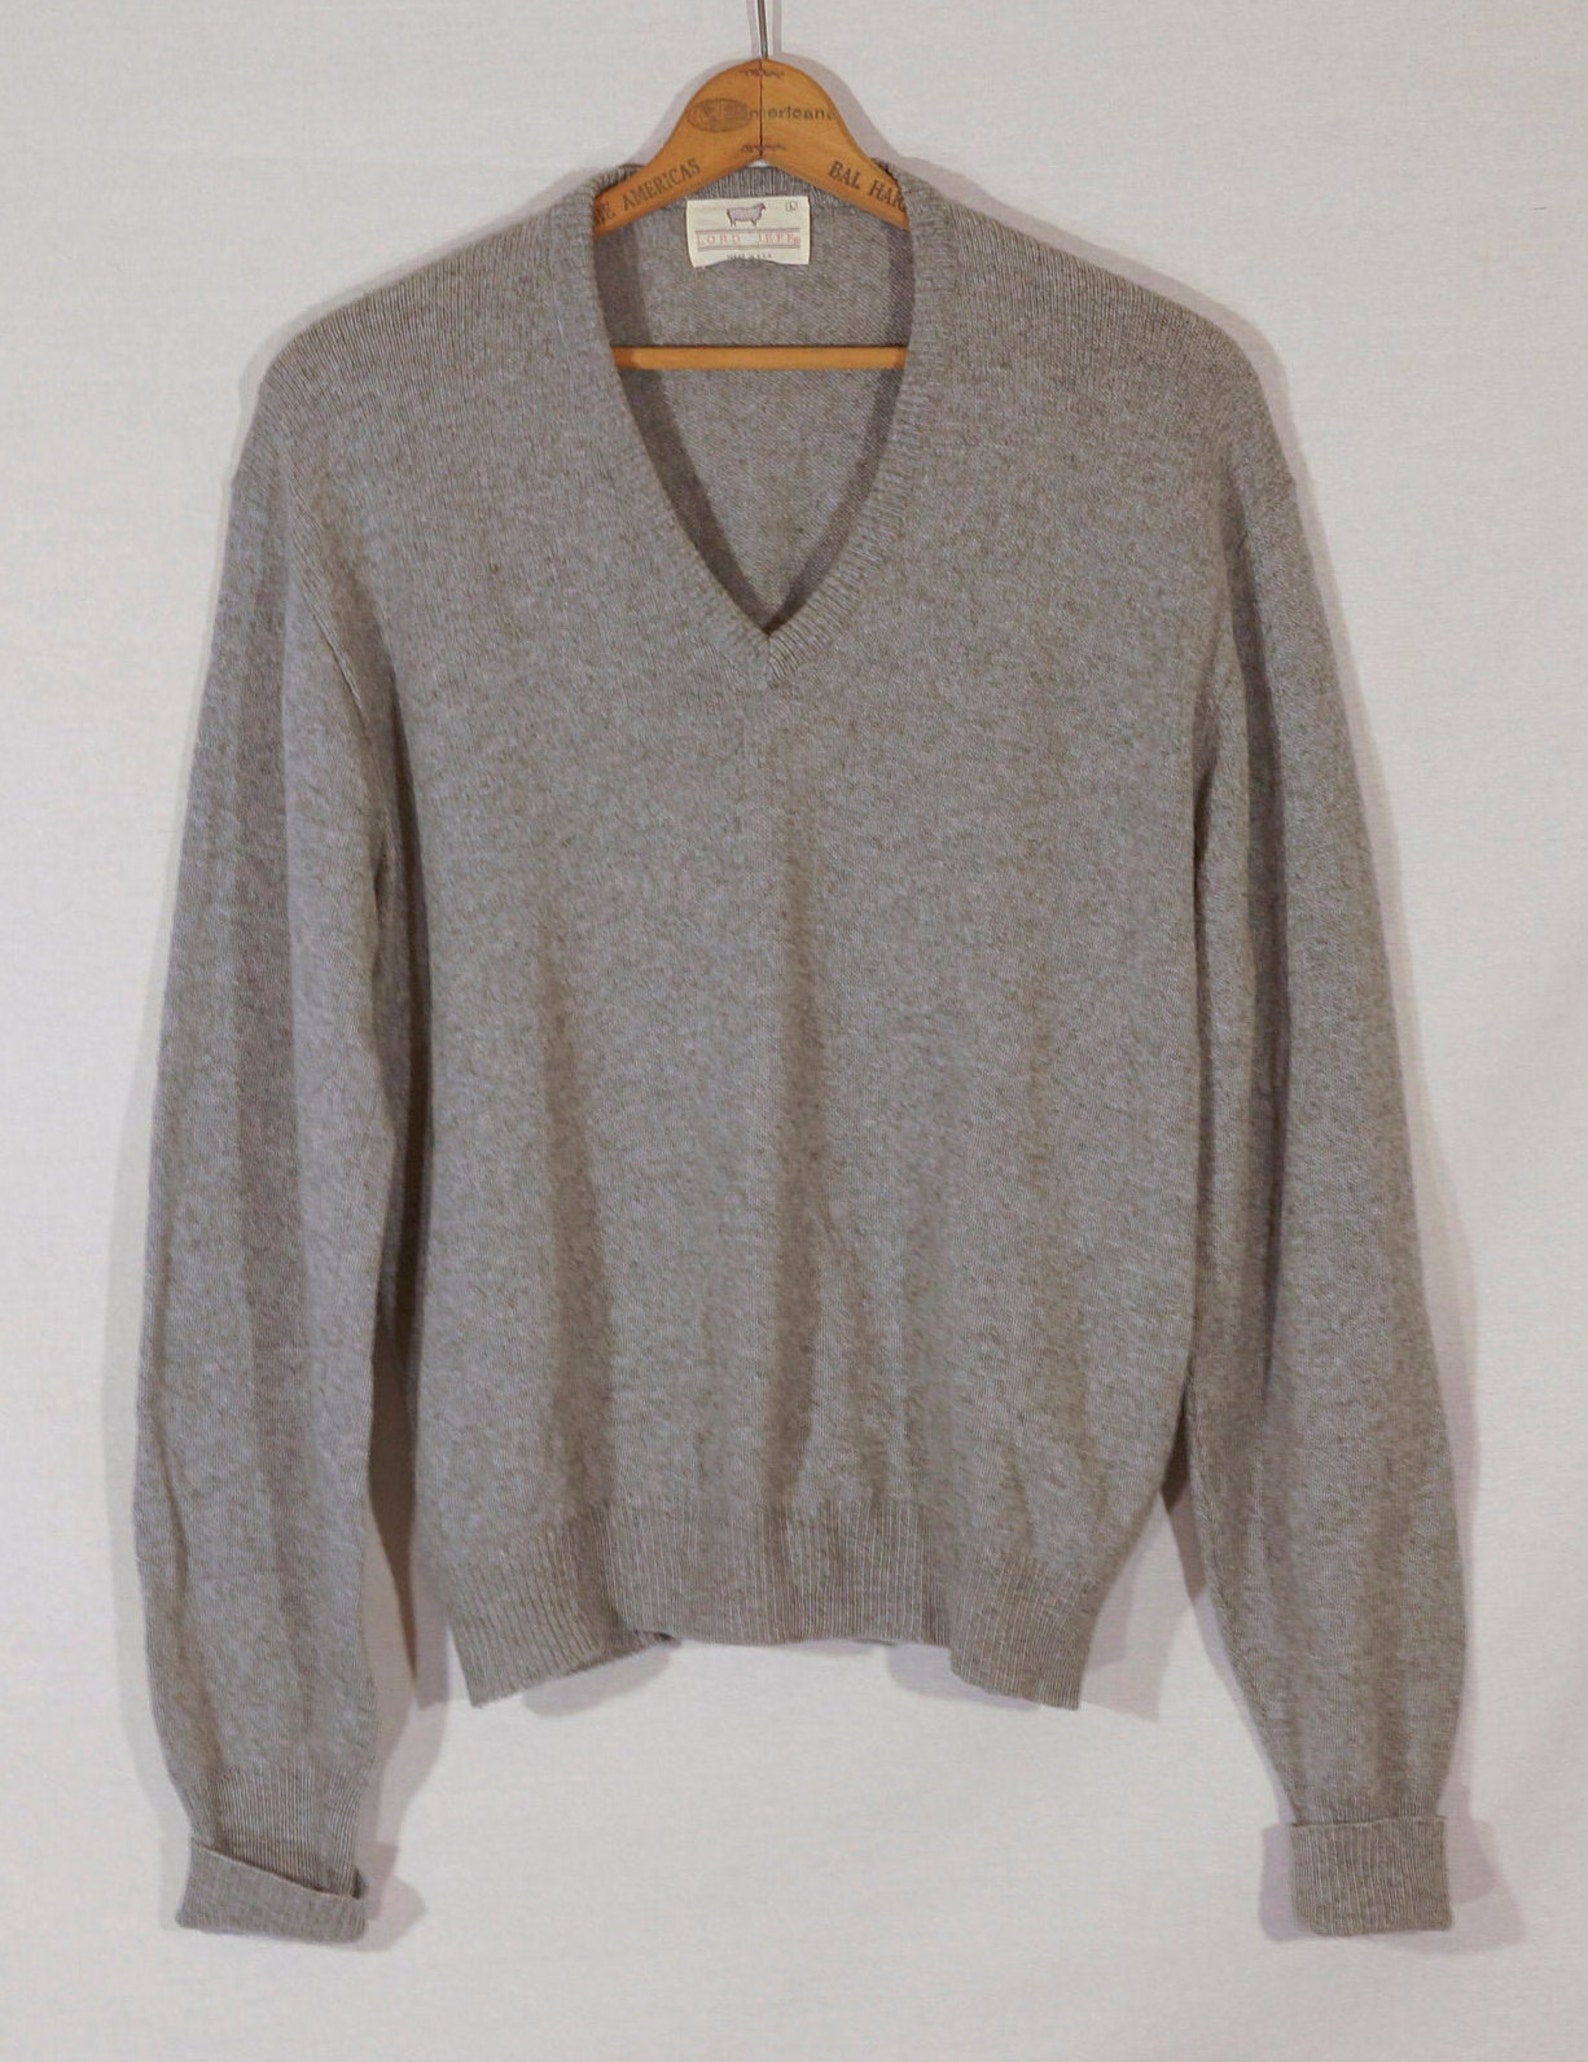 Vintage Wool Lord Jeff Sweater 1970's Lambswool Jumper V - Etsy